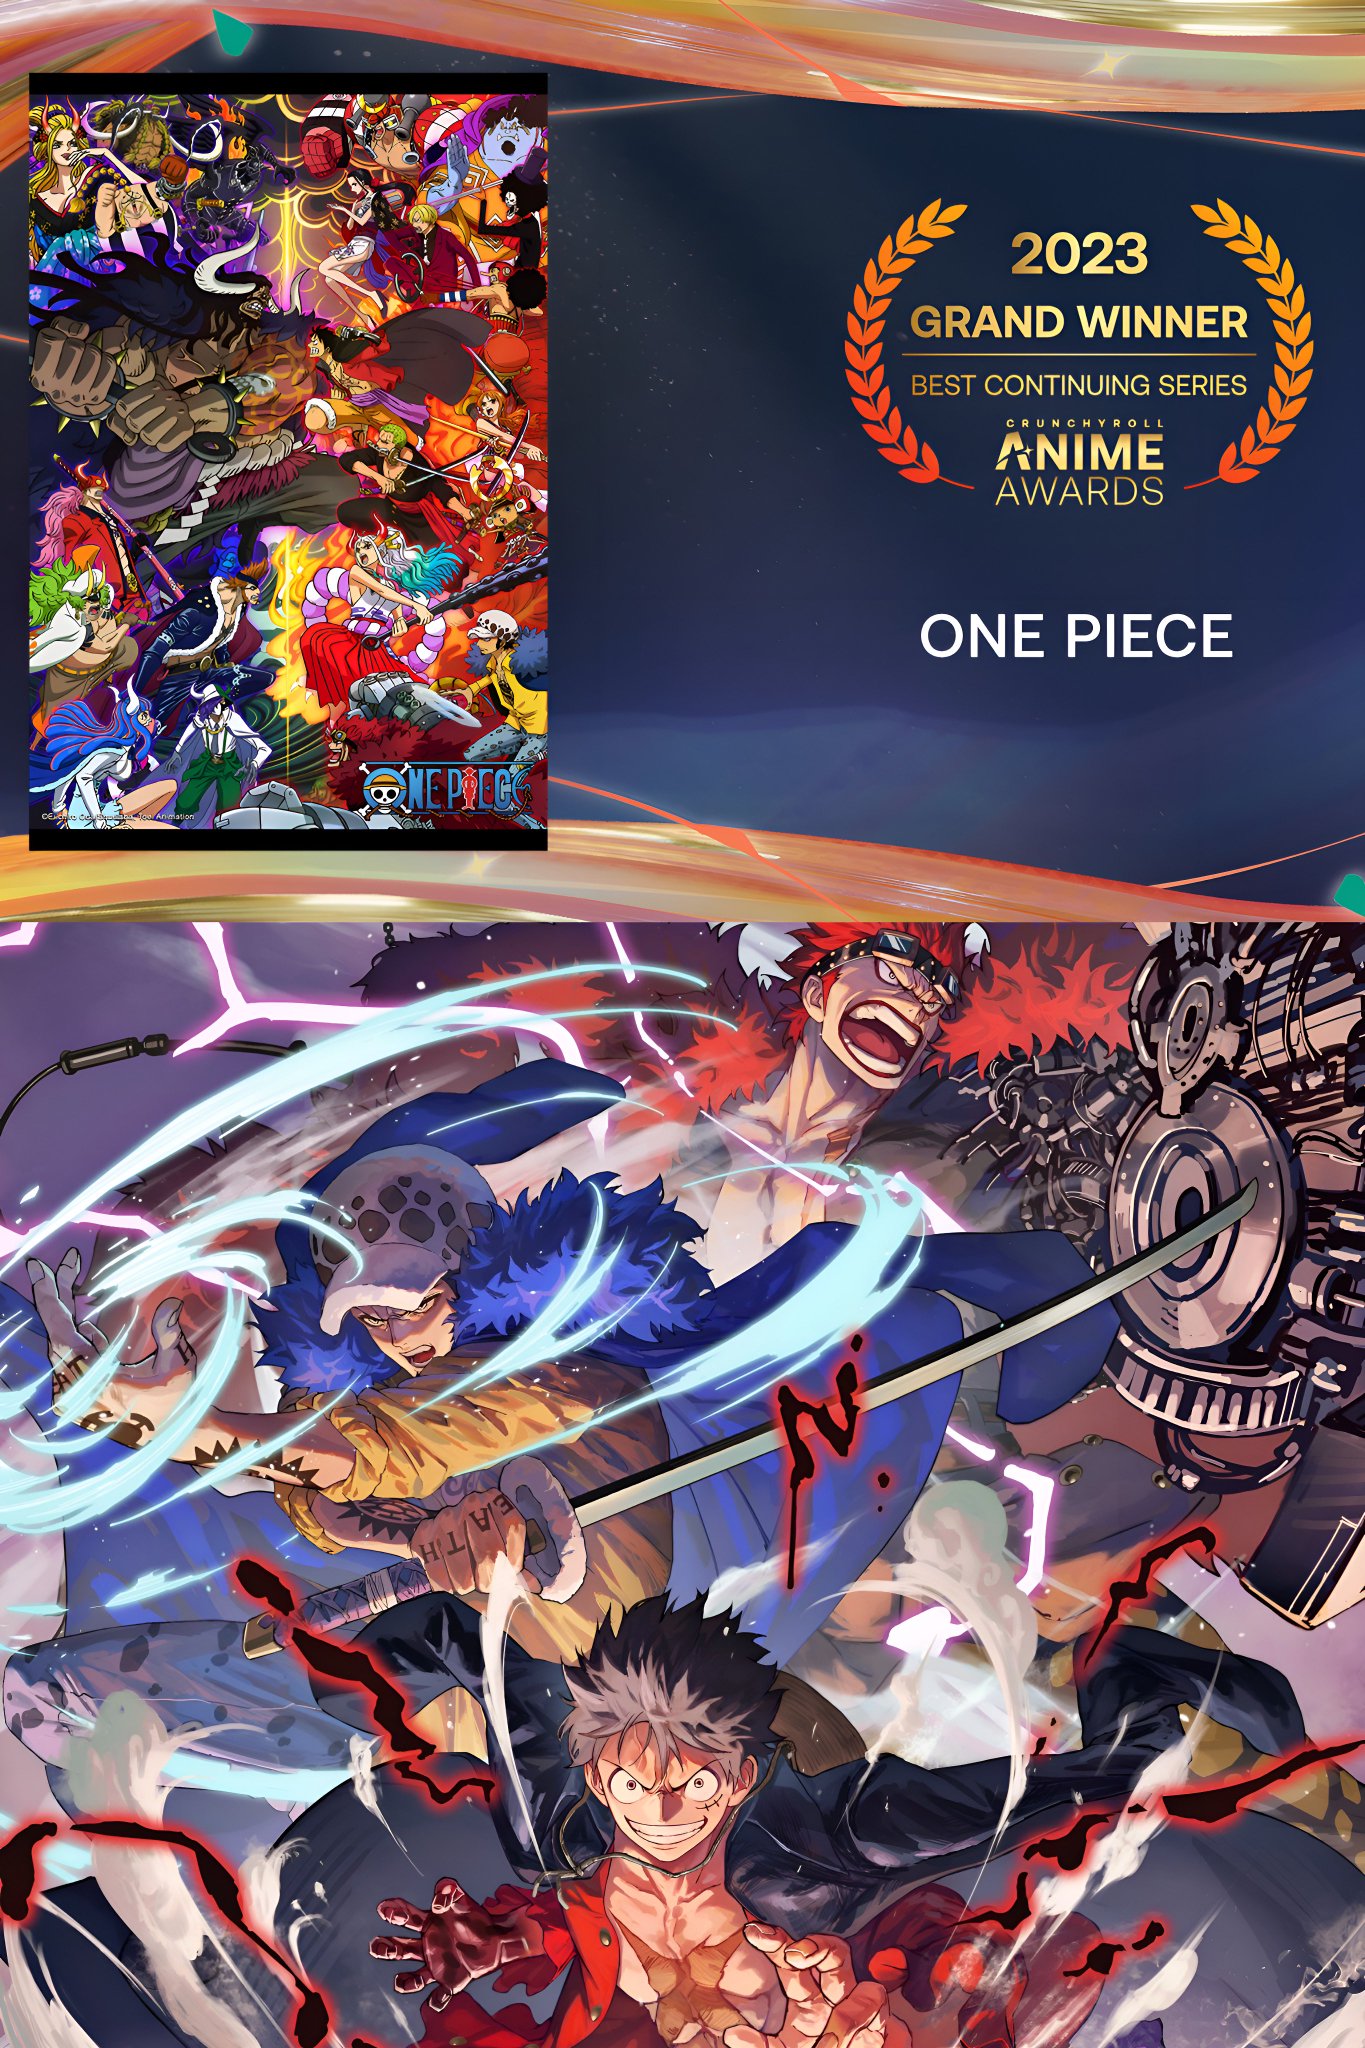 One Piece wins Best Continuing Series at Crunchyroll Anime Awards 2023